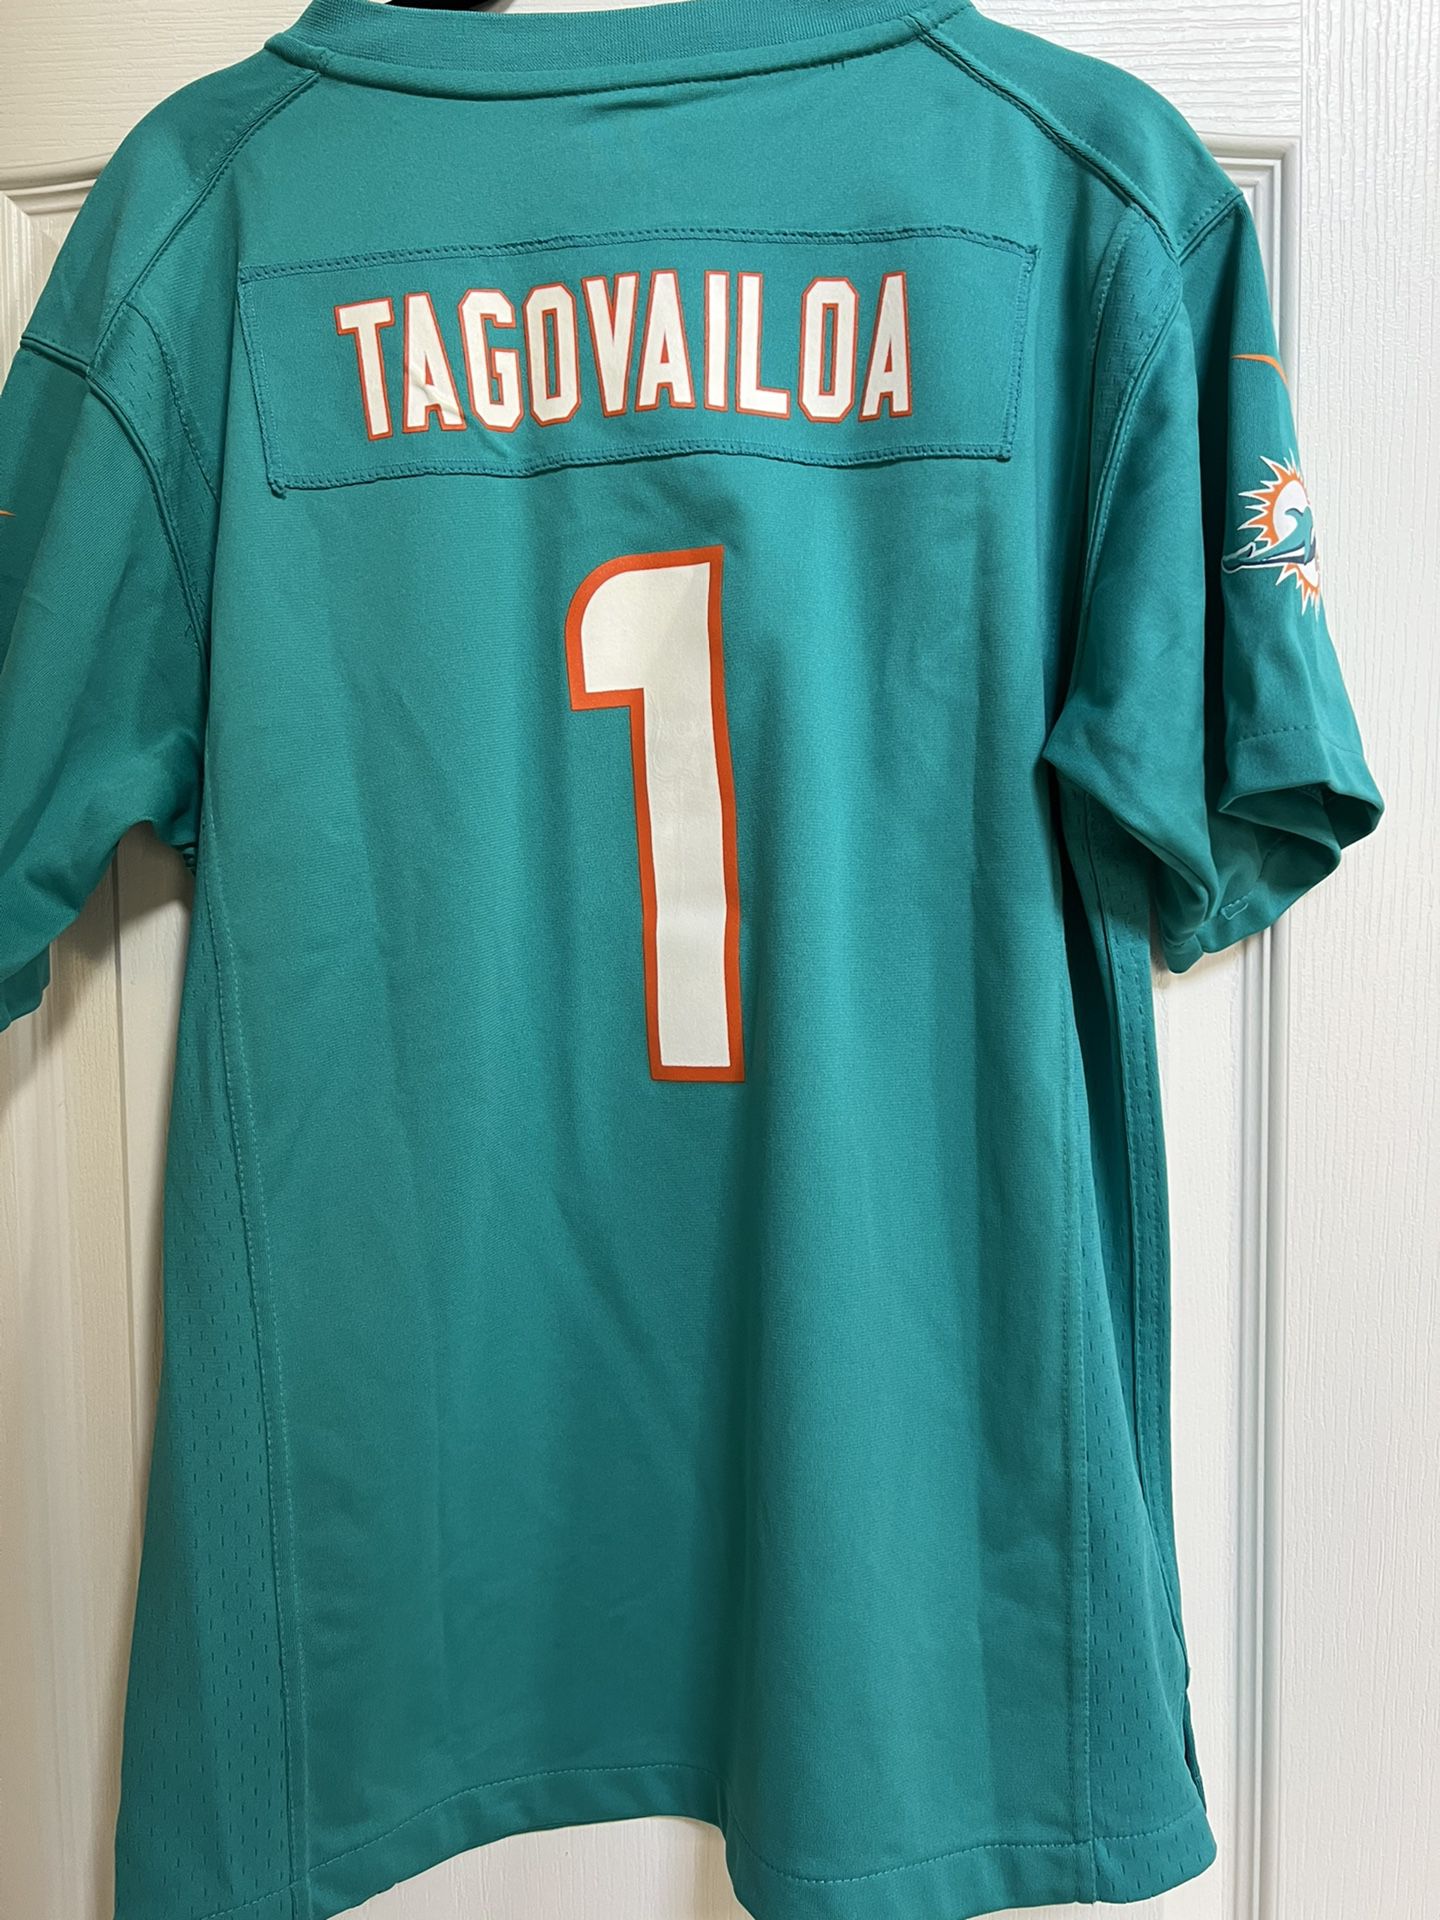 Nike Dolphins Tua Tagovailoa Jersey Youth Size XL for Sale in Dania Beach,  FL - OfferUp